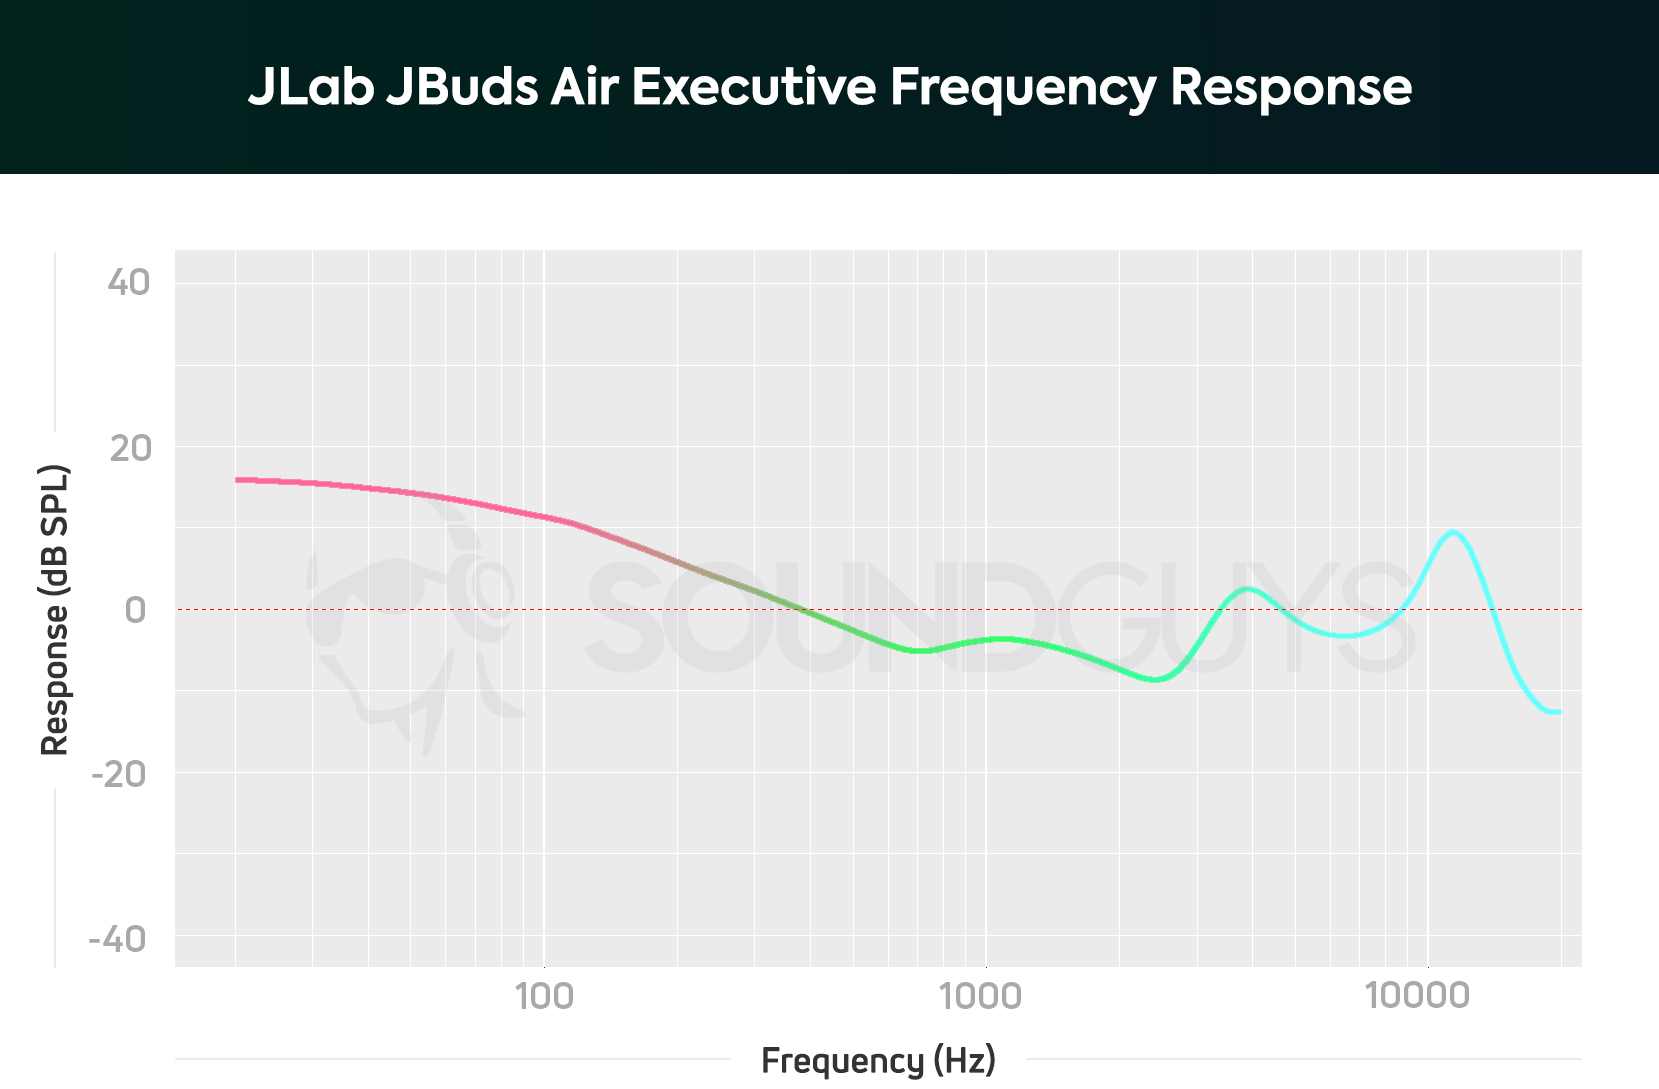 Frequency response chart for the JLab JBuds Air Executive.